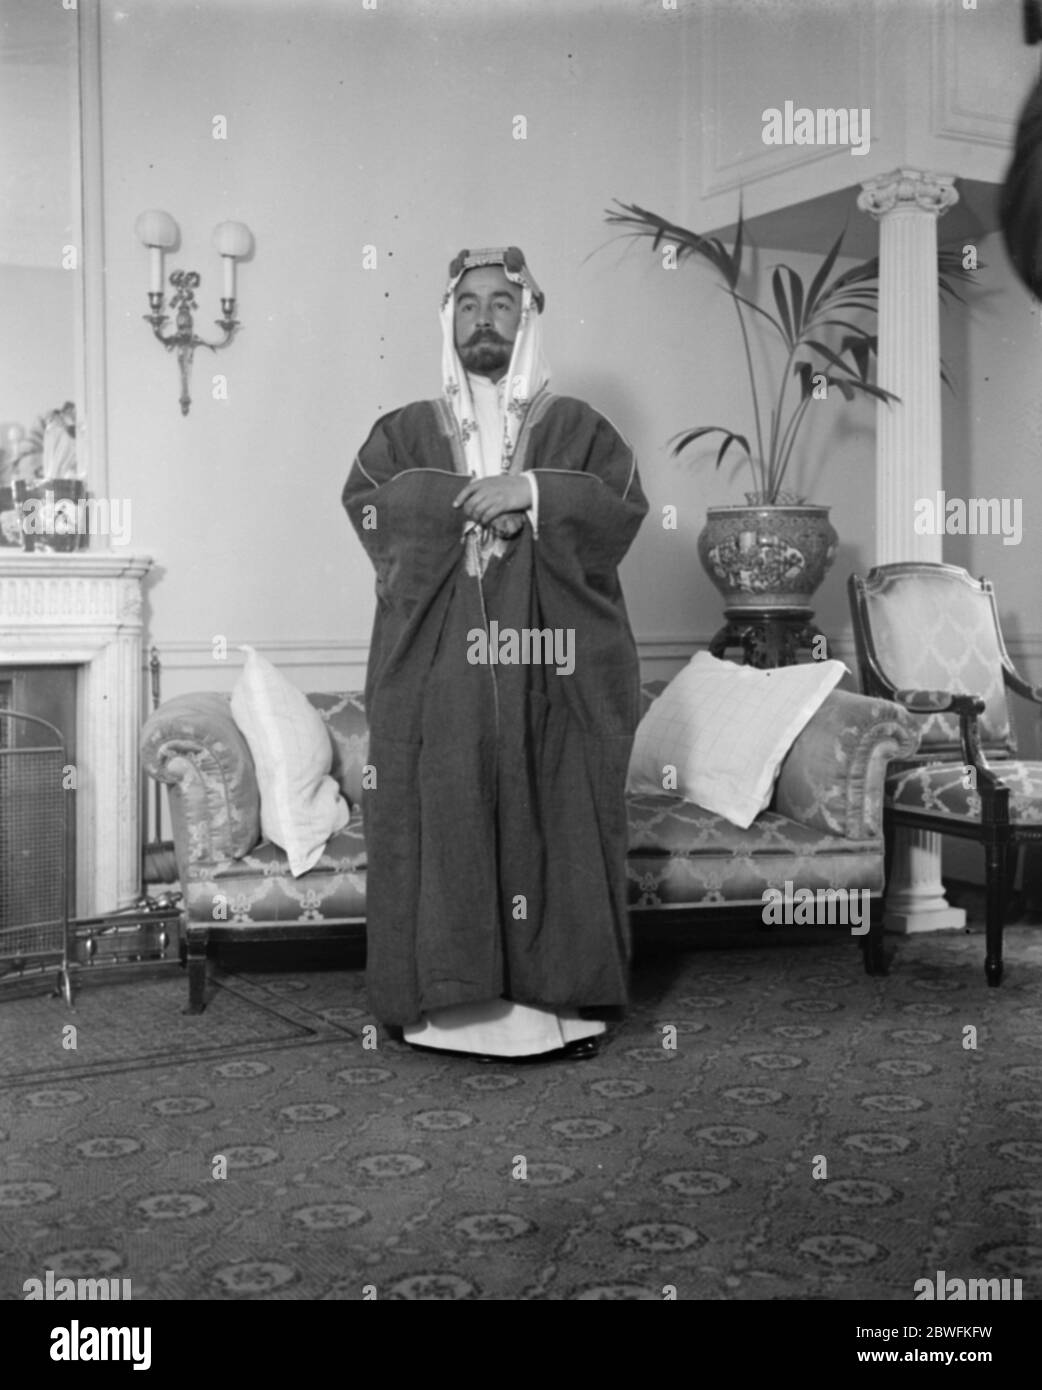 Emir Abdullah in London The Emir Abdullah of transjordania second son of the King of the Hedjaz has arrived in Lonodn to discuss Transjordanian affairs . The Emir Abdullah at the Carlton Hotel 16 October 1922 Stock Photo